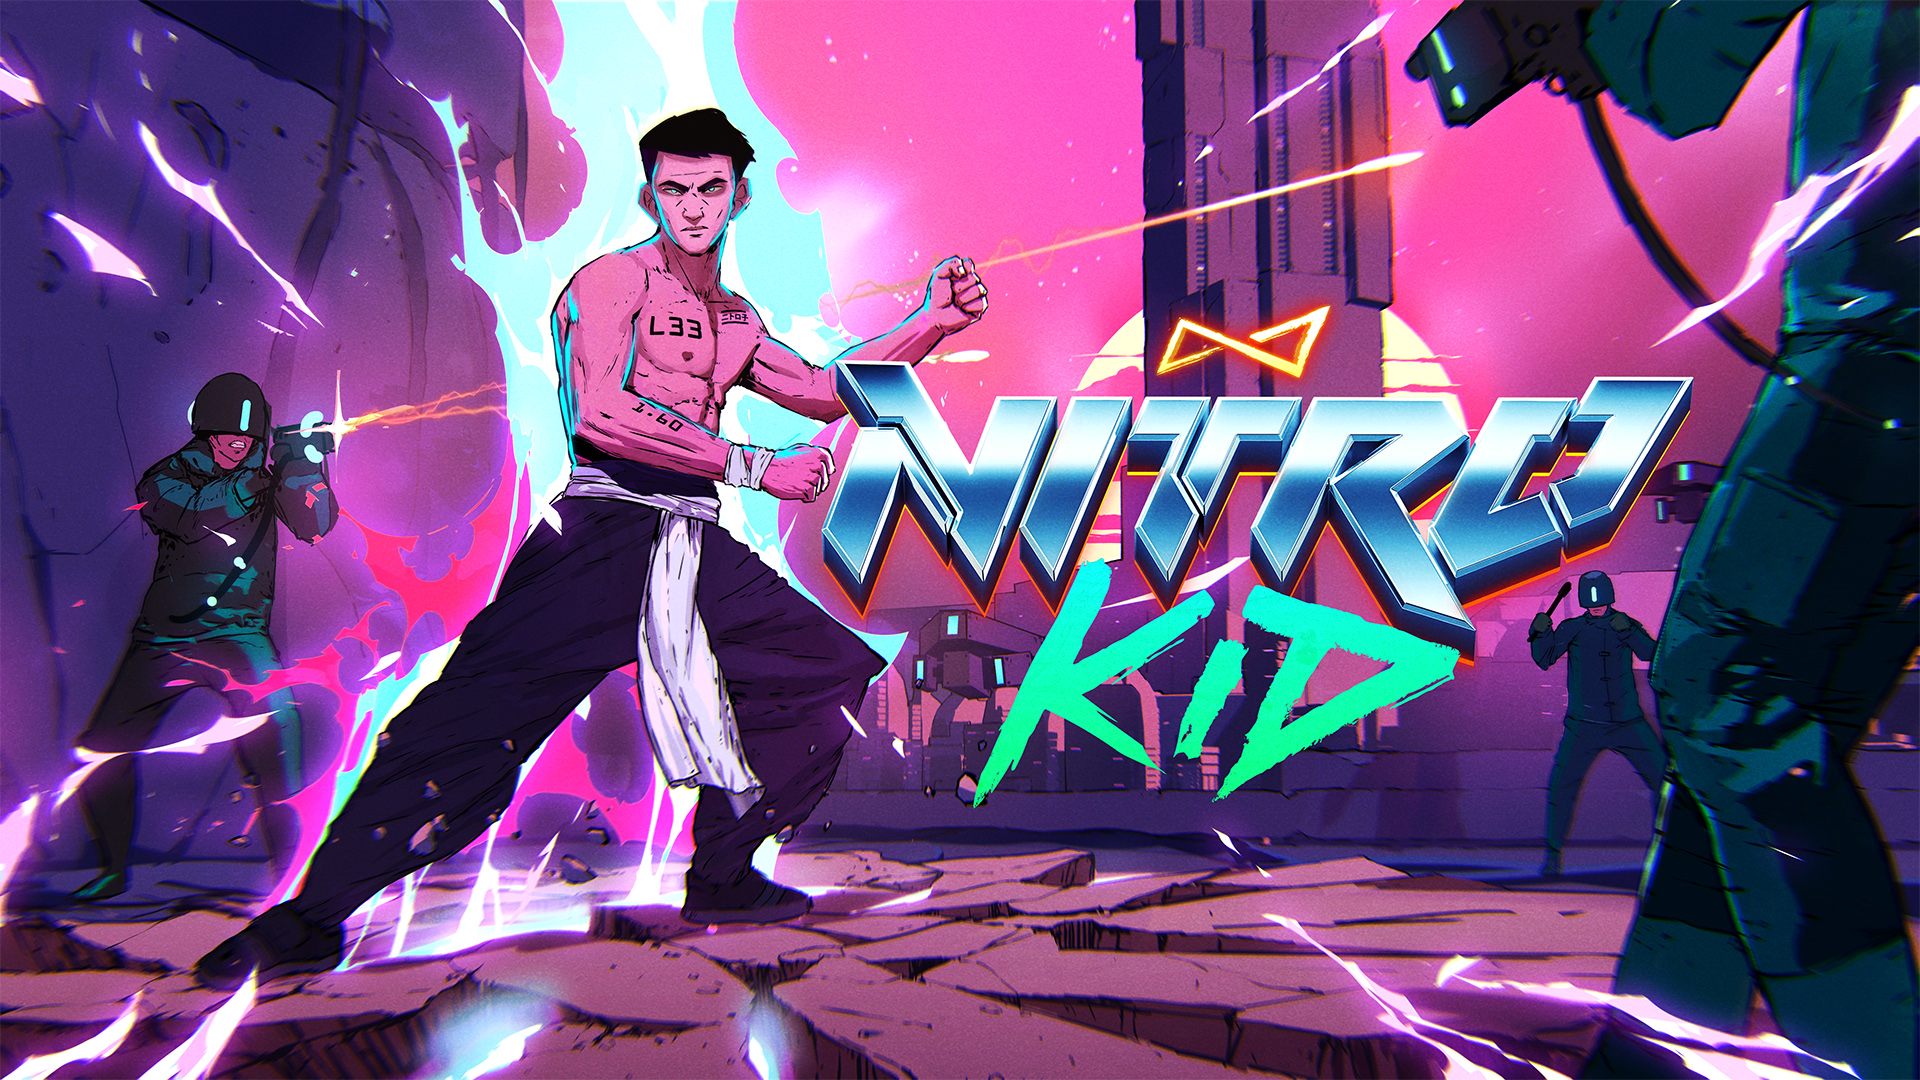 Nitro Kid infuses retro neon kung fu action into a rogue-like deckbuilder, and these are all words that excite me together